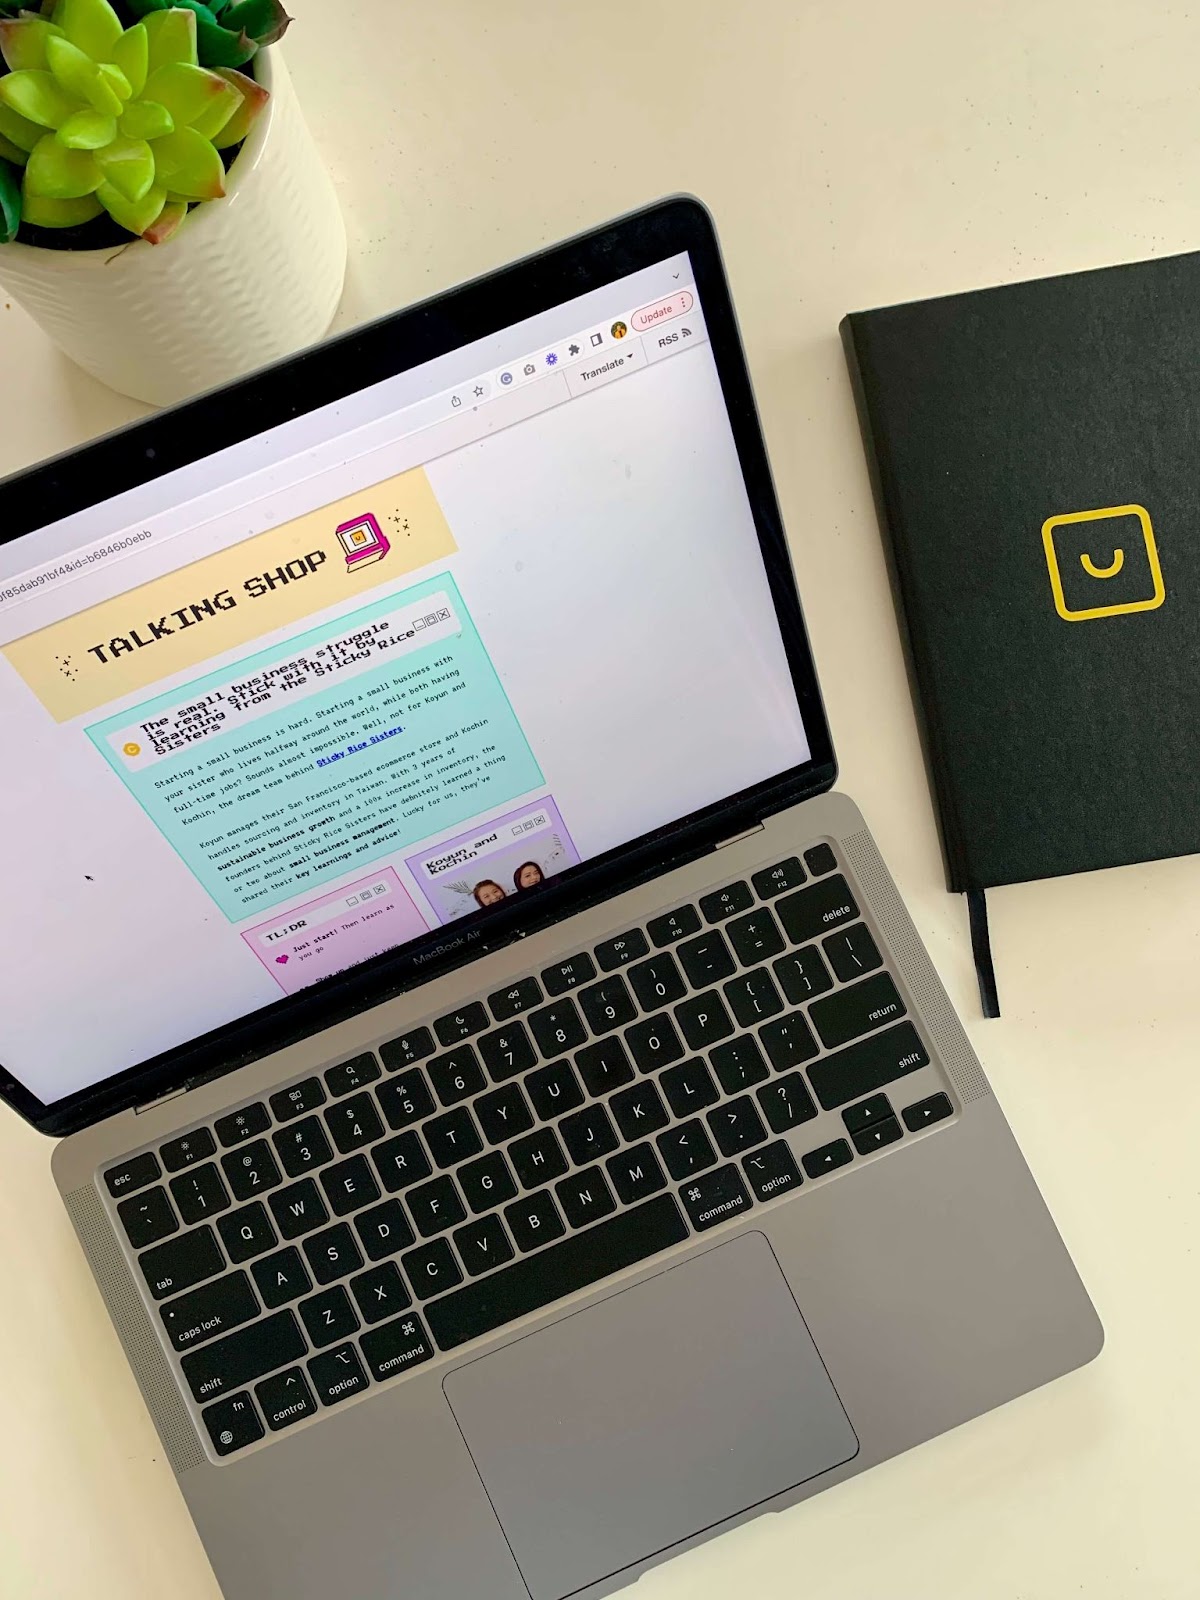 Talking Shop Smile Newsletter–An image of a MacBook on a white table open to the Talking Shop newsletter, which is an 8-bit style newsletter in bright colors. There is a black notebook with the yellow smile logo on it and a succulent plant on the table. 